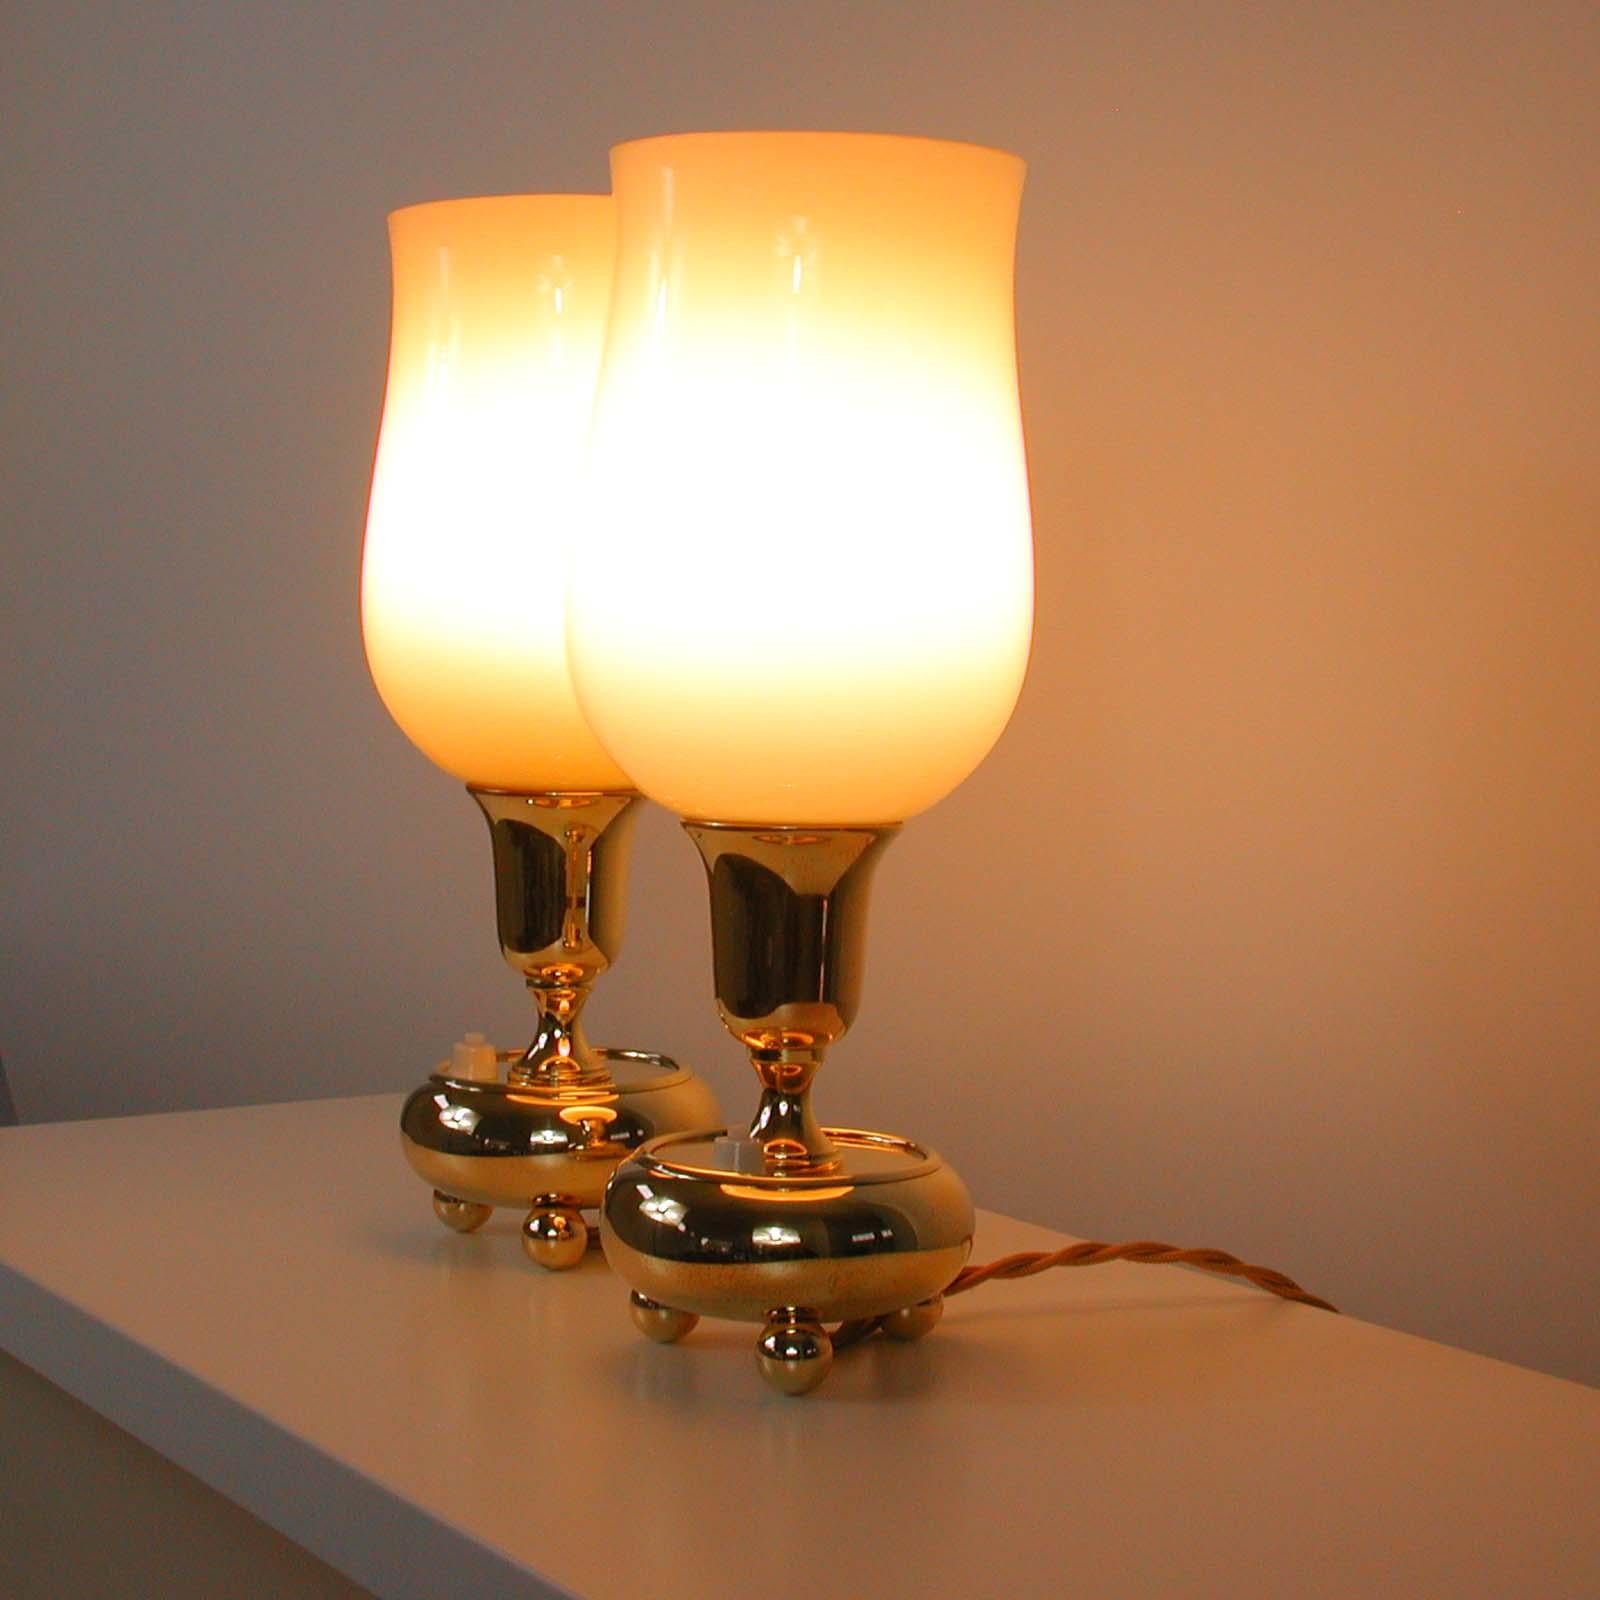 German Bauhaus Brass and Opal Torchiere Table Lamps, Set of 2, 1930s For Sale 3